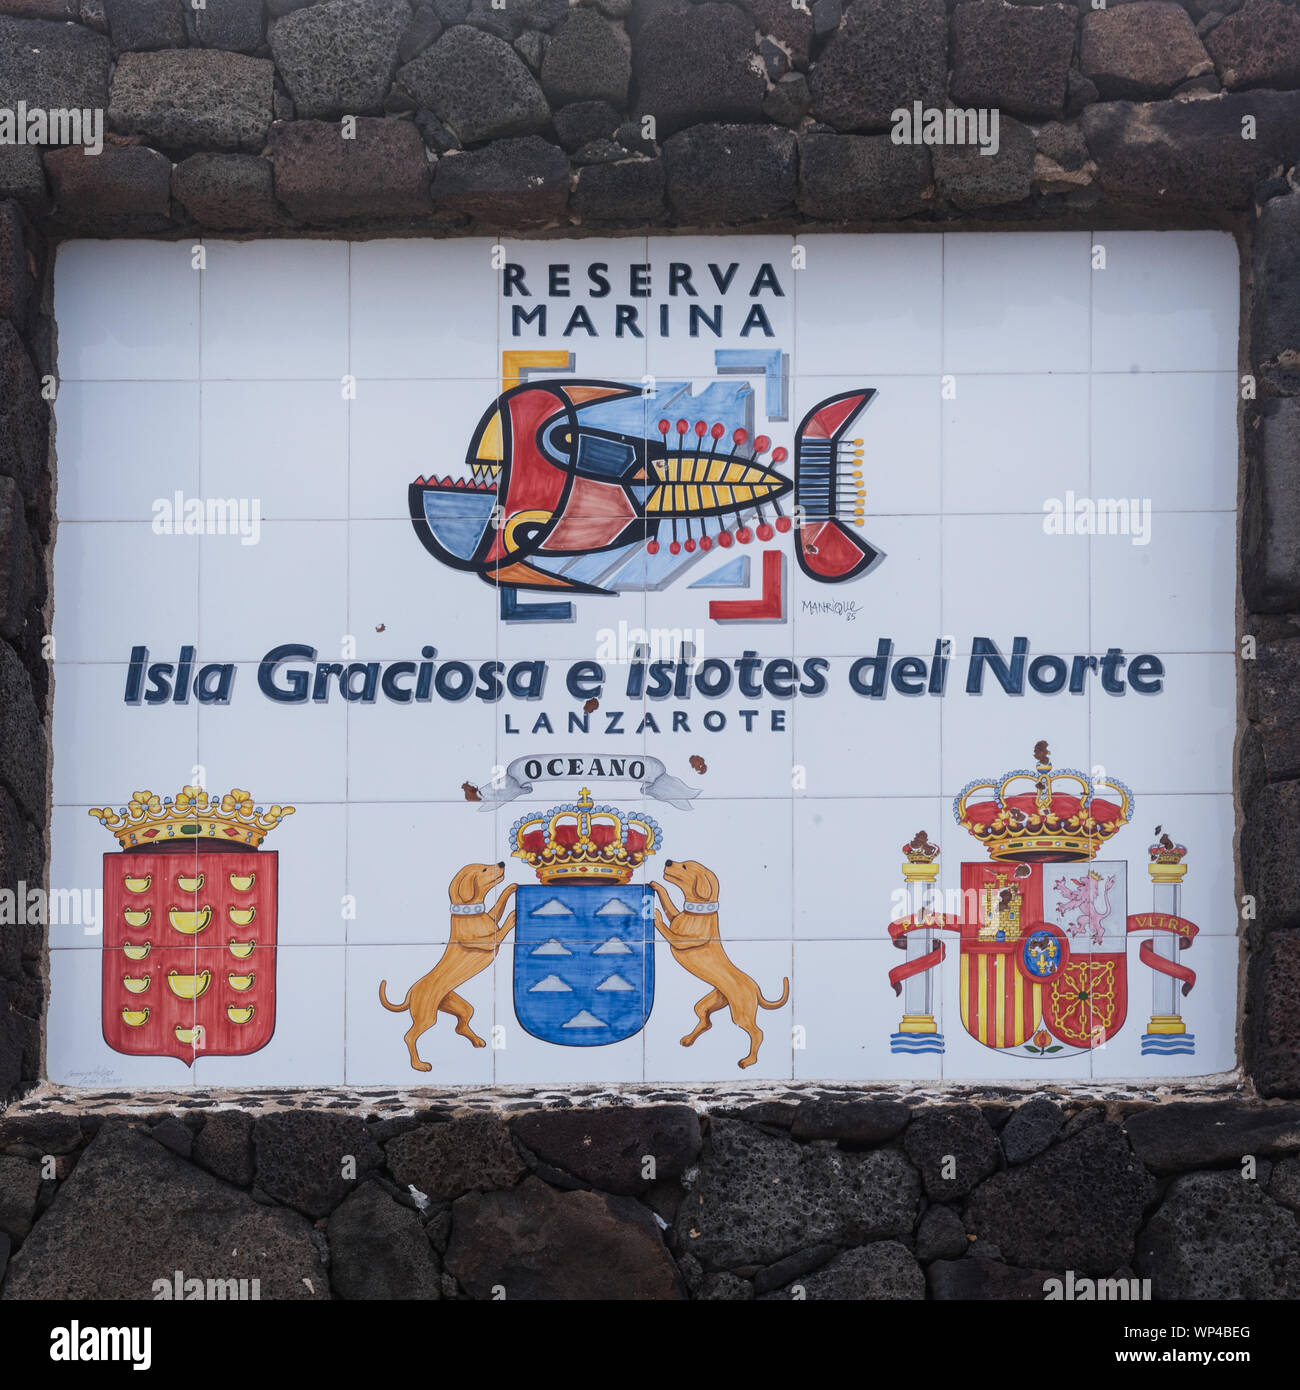 Orzola,Lanzarote, Spain October 15  2018: Sign for for the Marine reserve of the 'Graciosa Island and small Islands of the North' with a fish painting Stock Photo